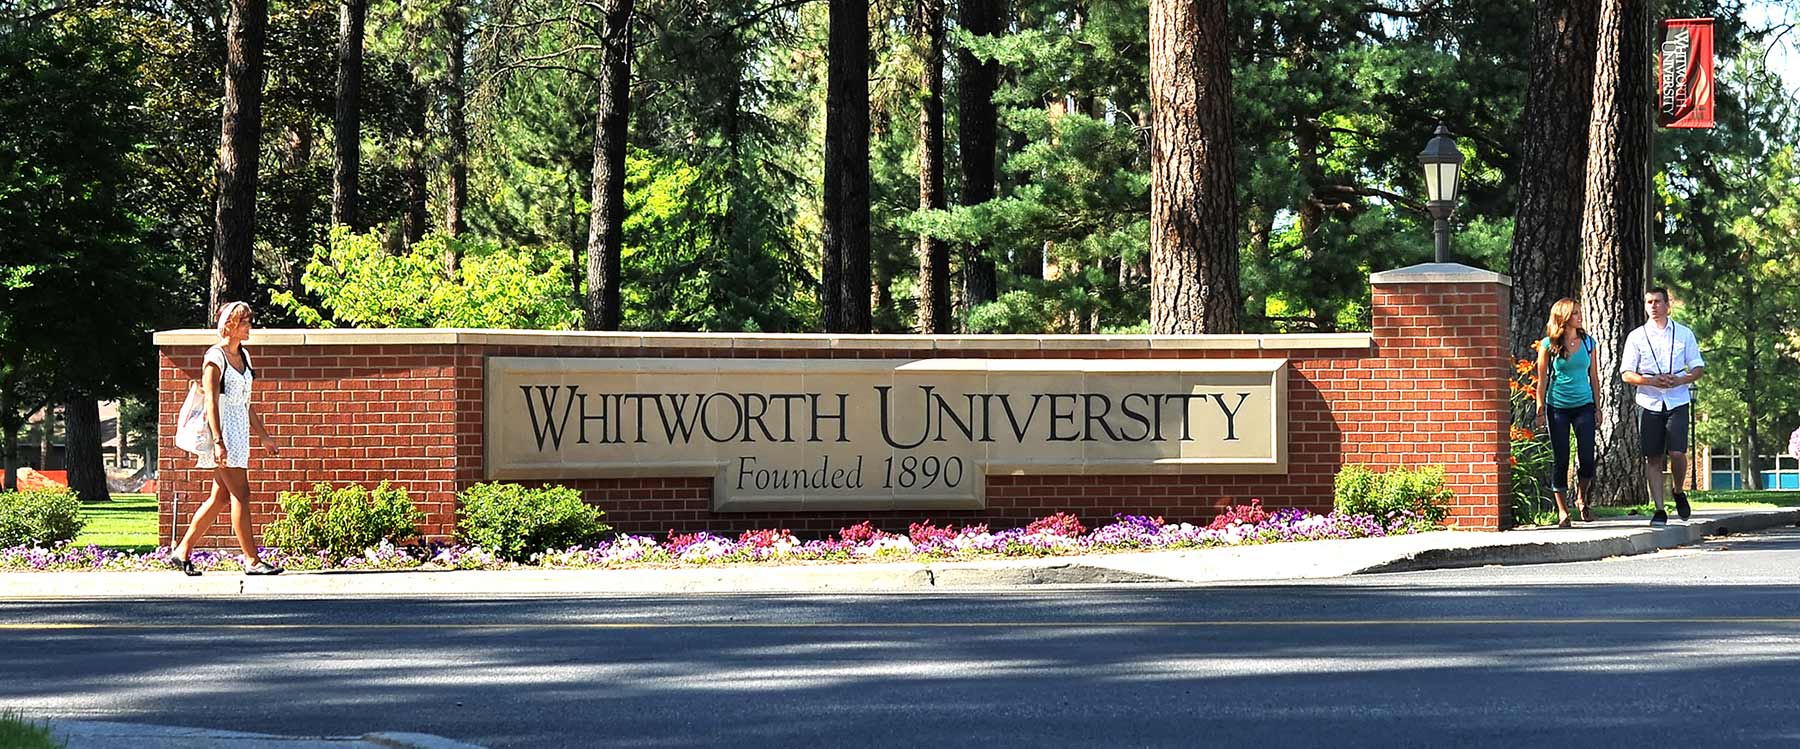 Students walk on the sidewalk on either side of a brick Whitworth campus entrance sign.